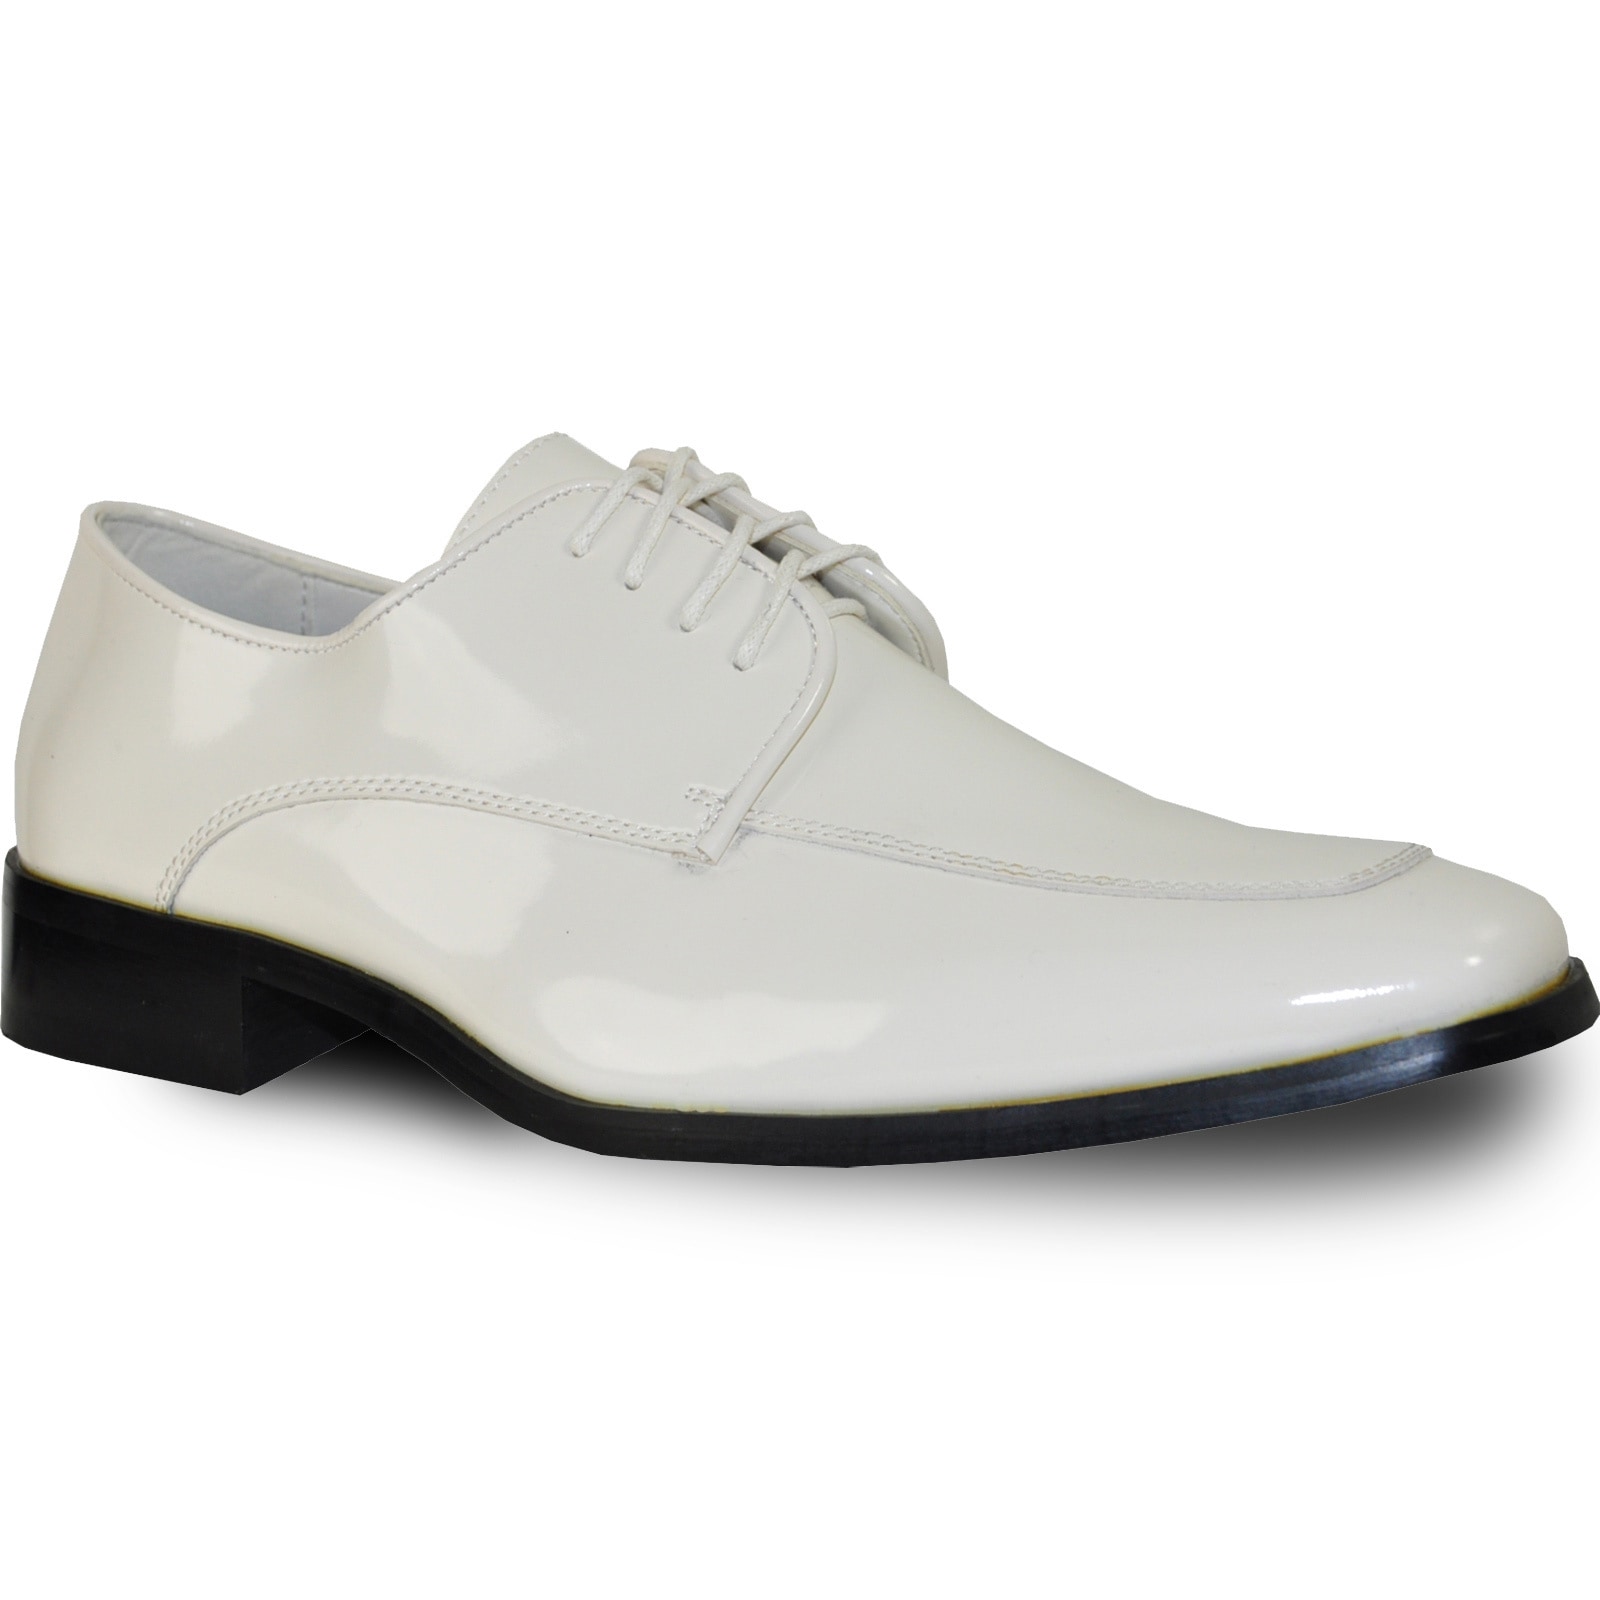 off white mens dress shoes